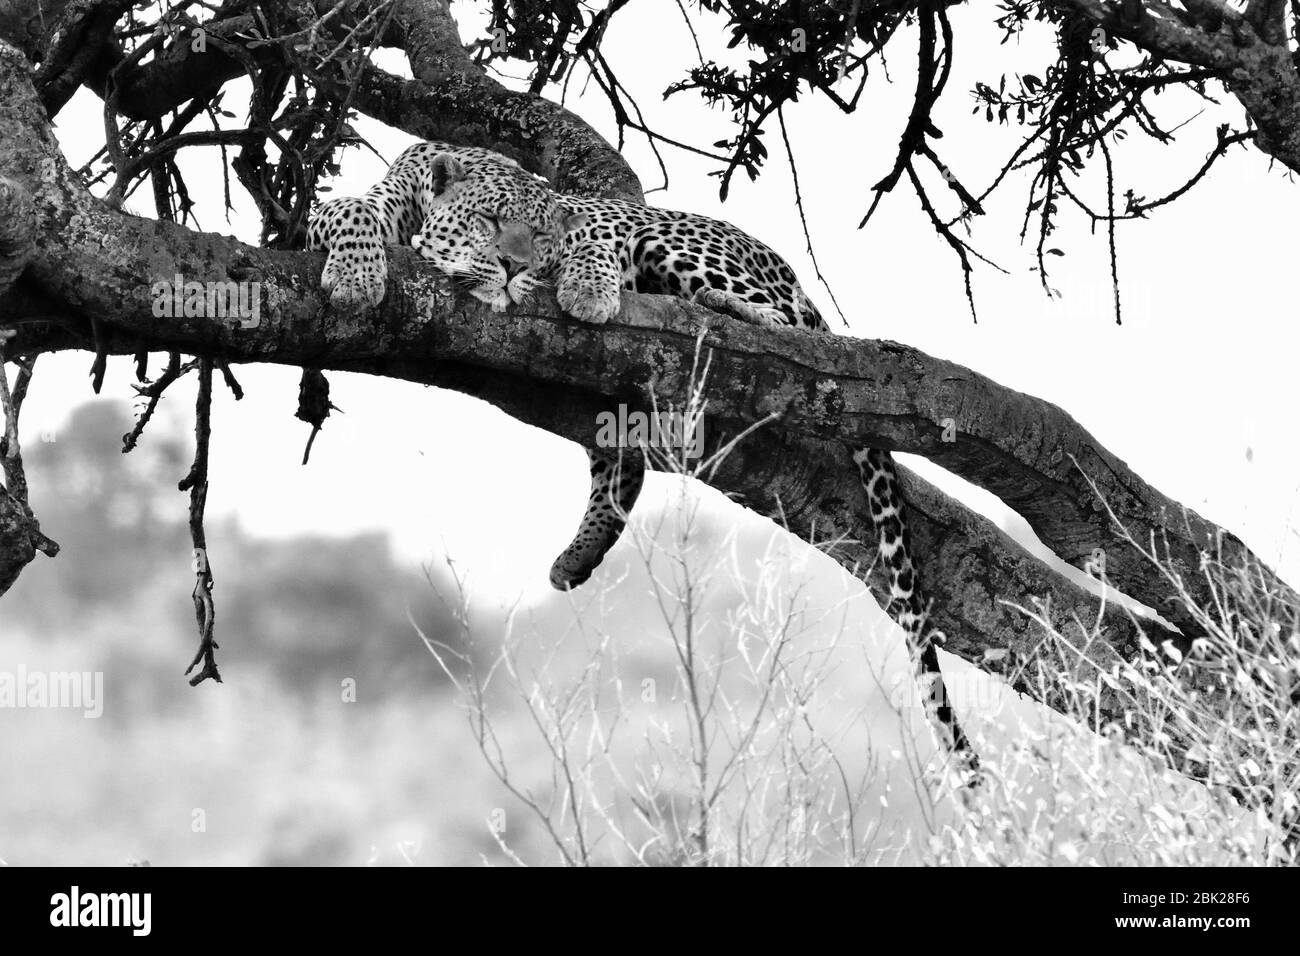 Leopard snoozing in a tree during the day Stock Photo